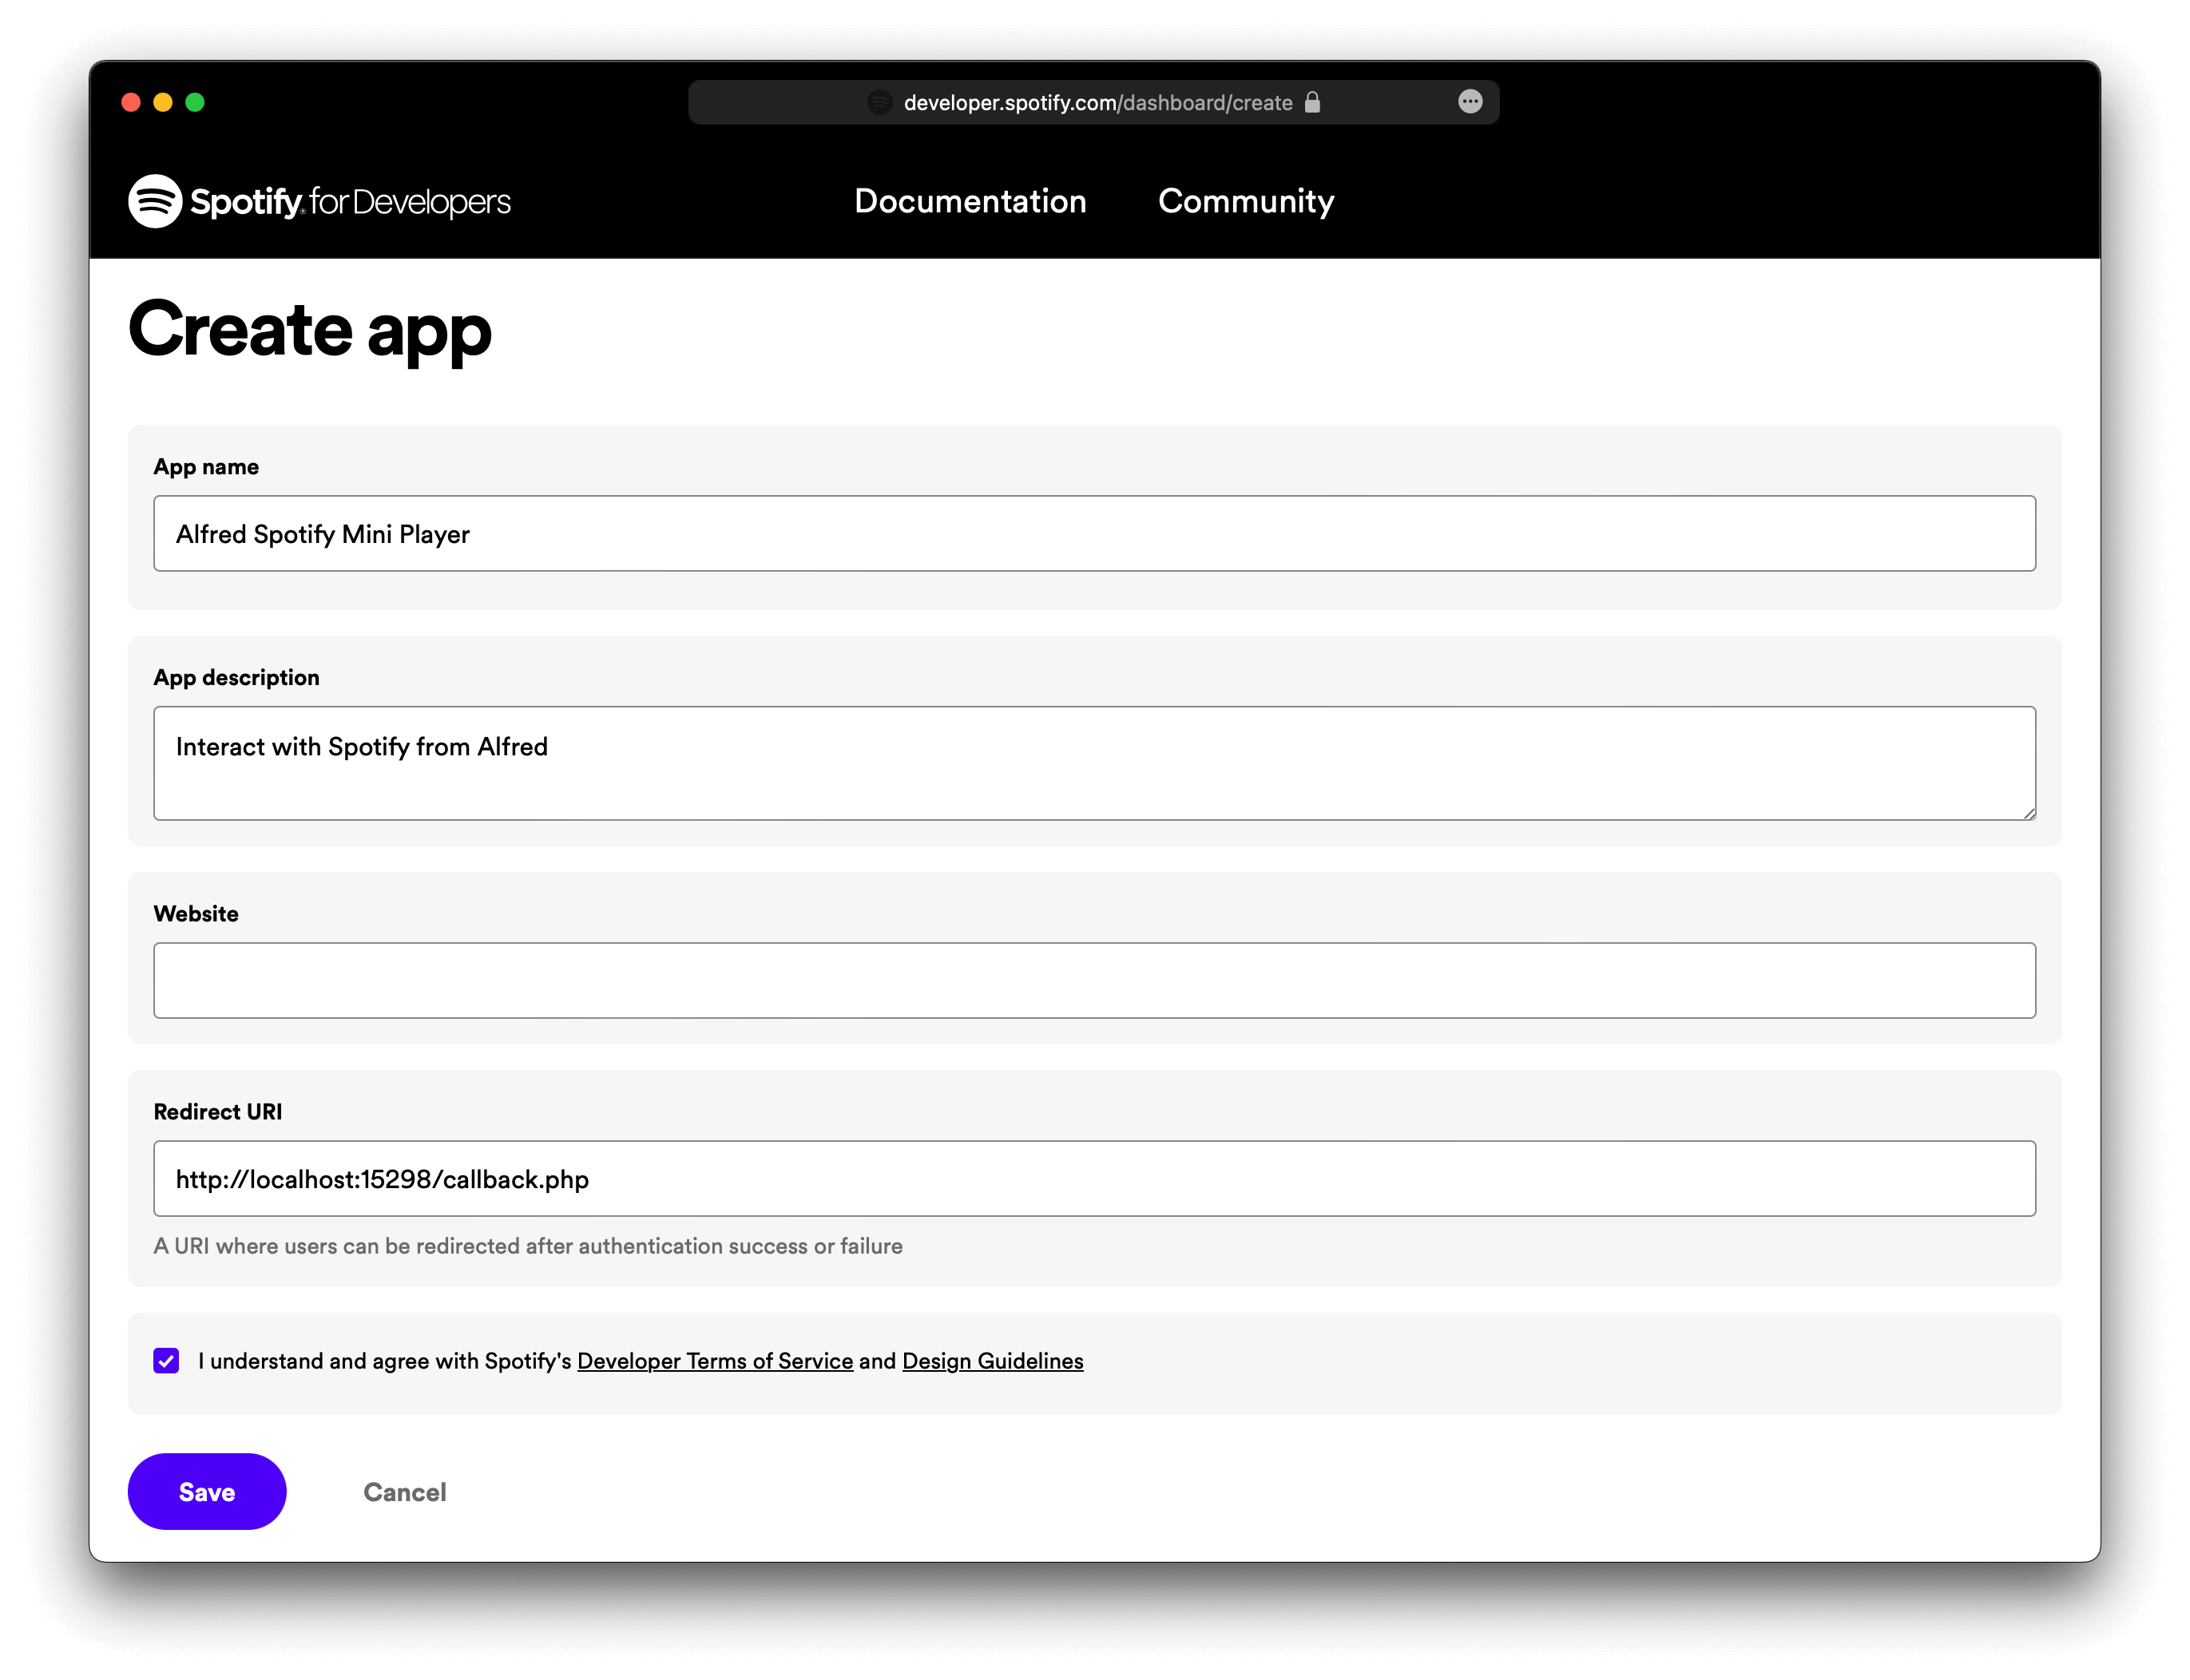 Creating app on Spotify’s website